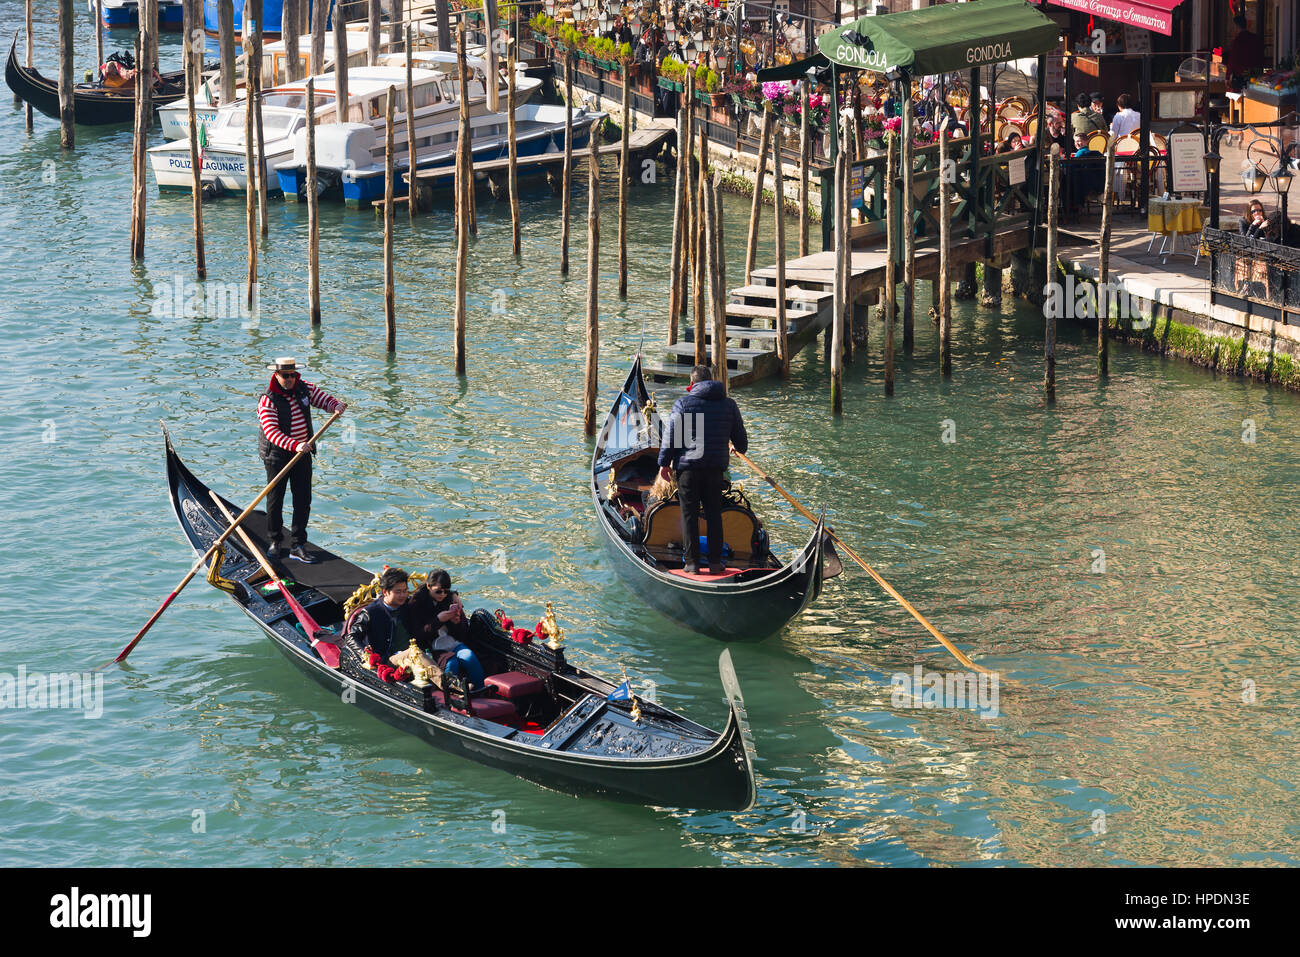 gondoliers are seen carrying passengers on the grand canal in venice Stock Photo